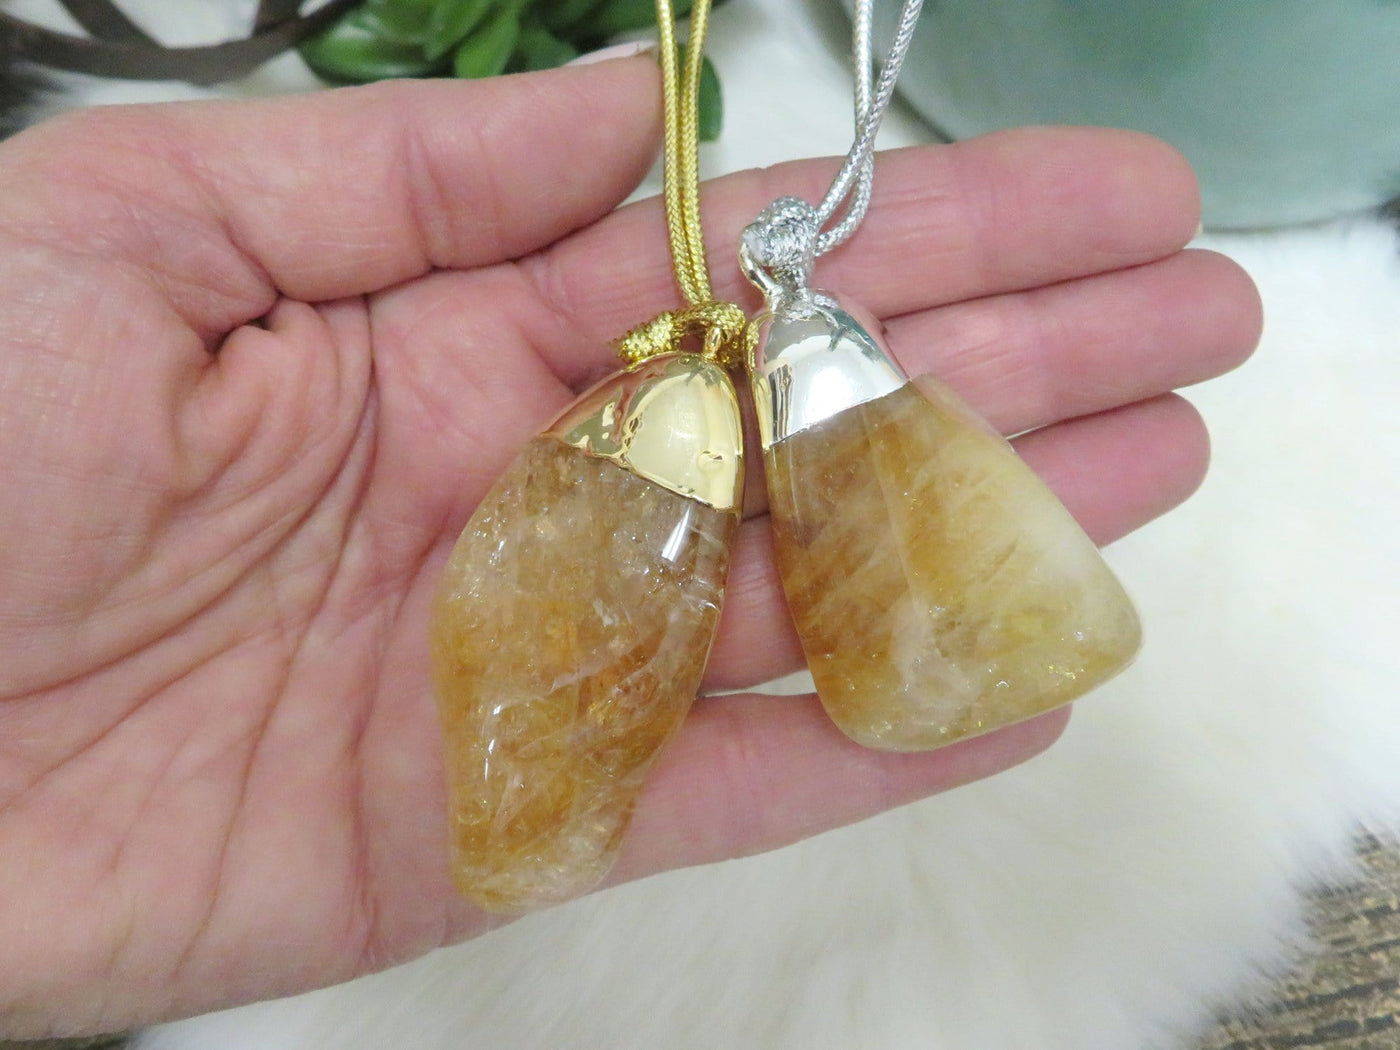 Citrine (heat treated) polished crystal ornament in hand for size reference